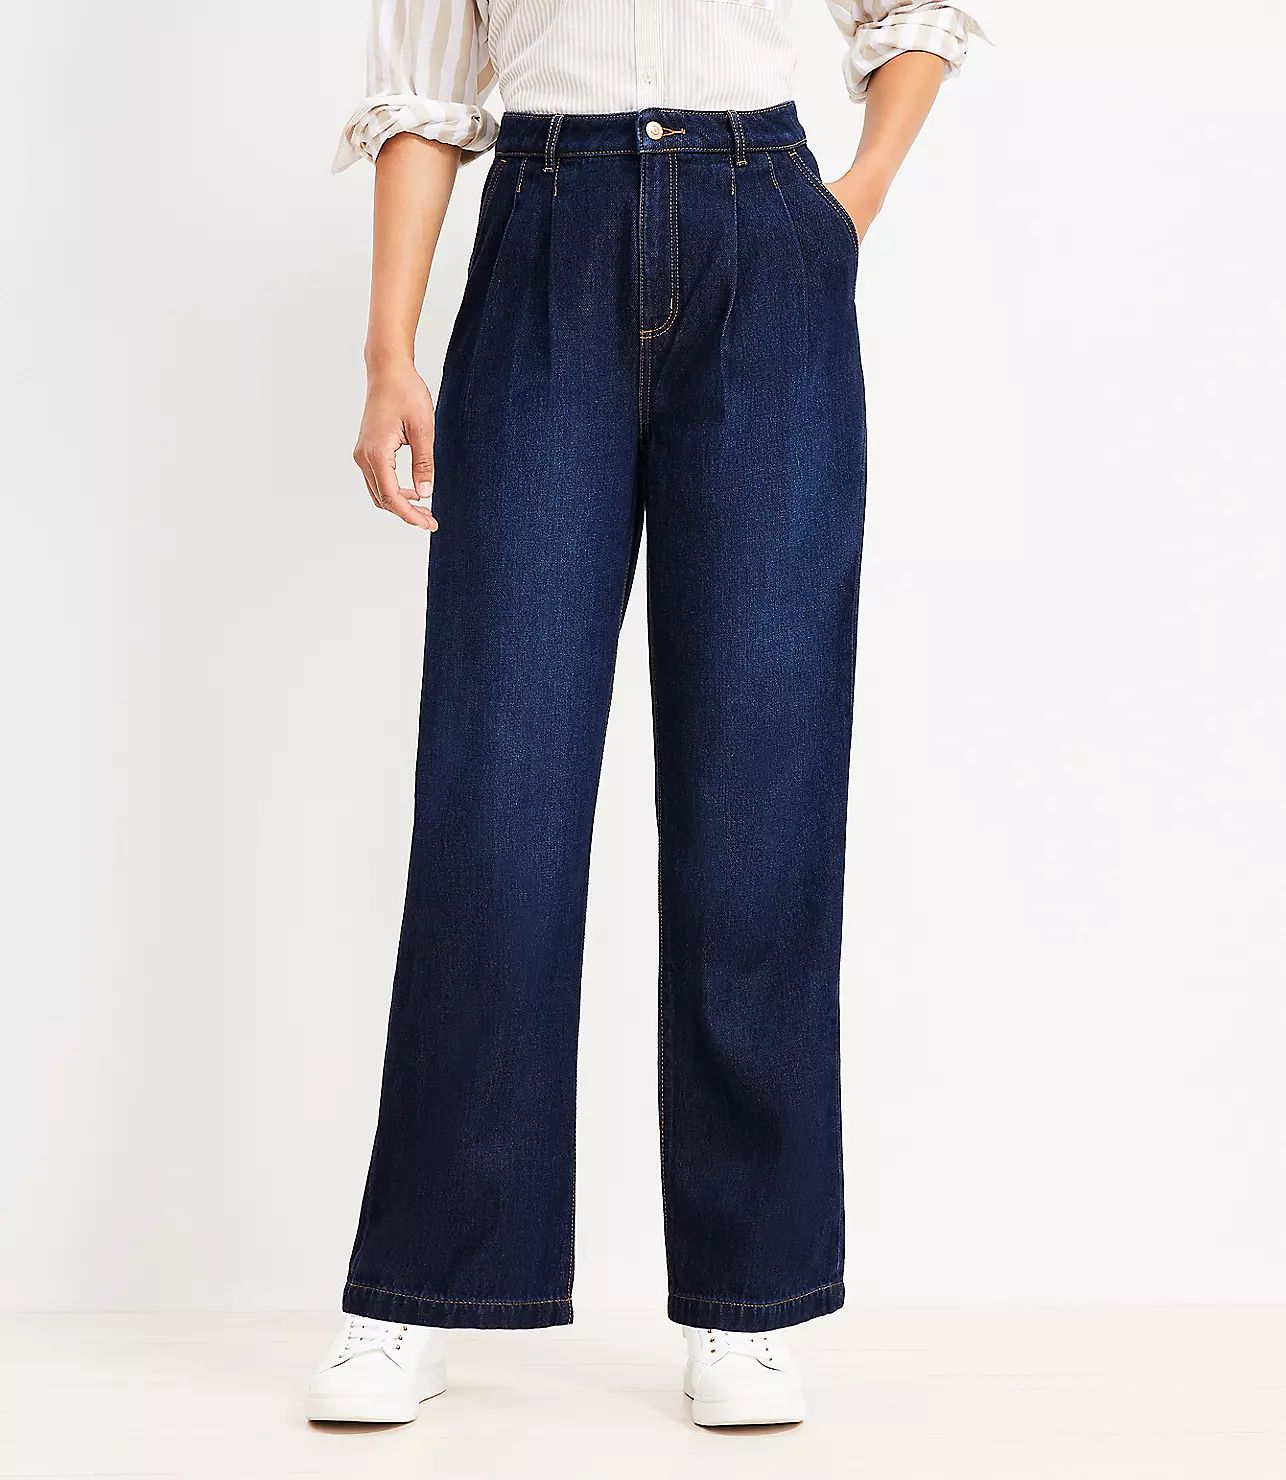 High Rise Palazzo Jeans in Classic Rinse Wash | LOFT